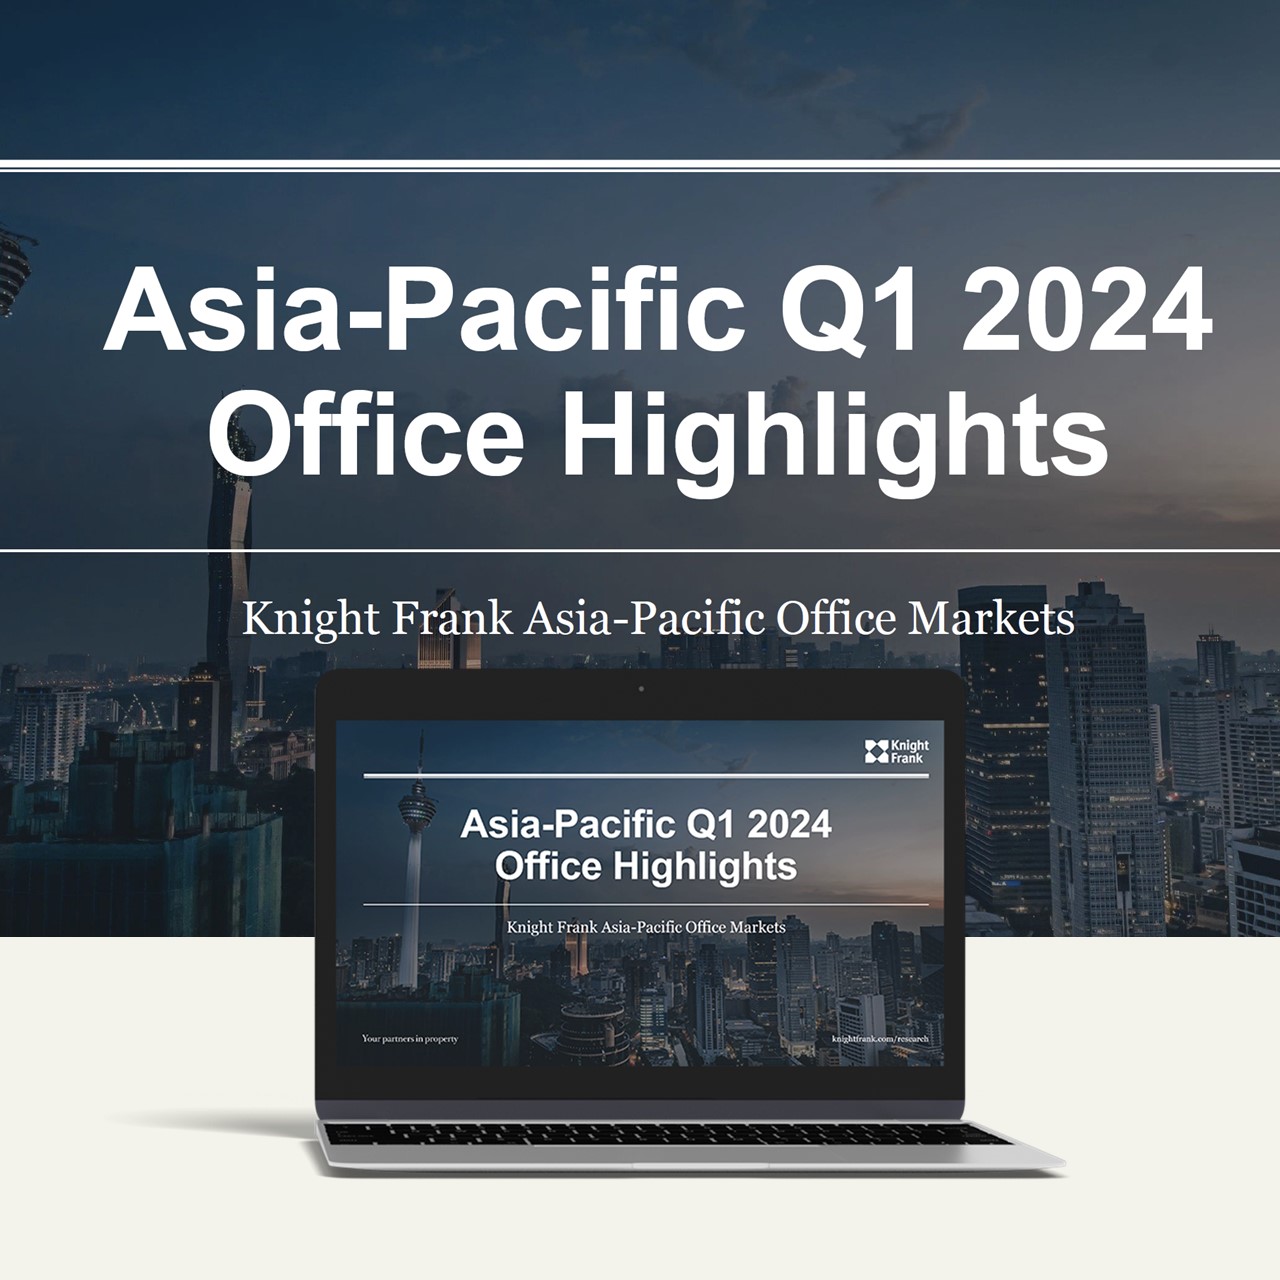 Knight Frank Asia-Pacific Q1 2024 Office Highlights